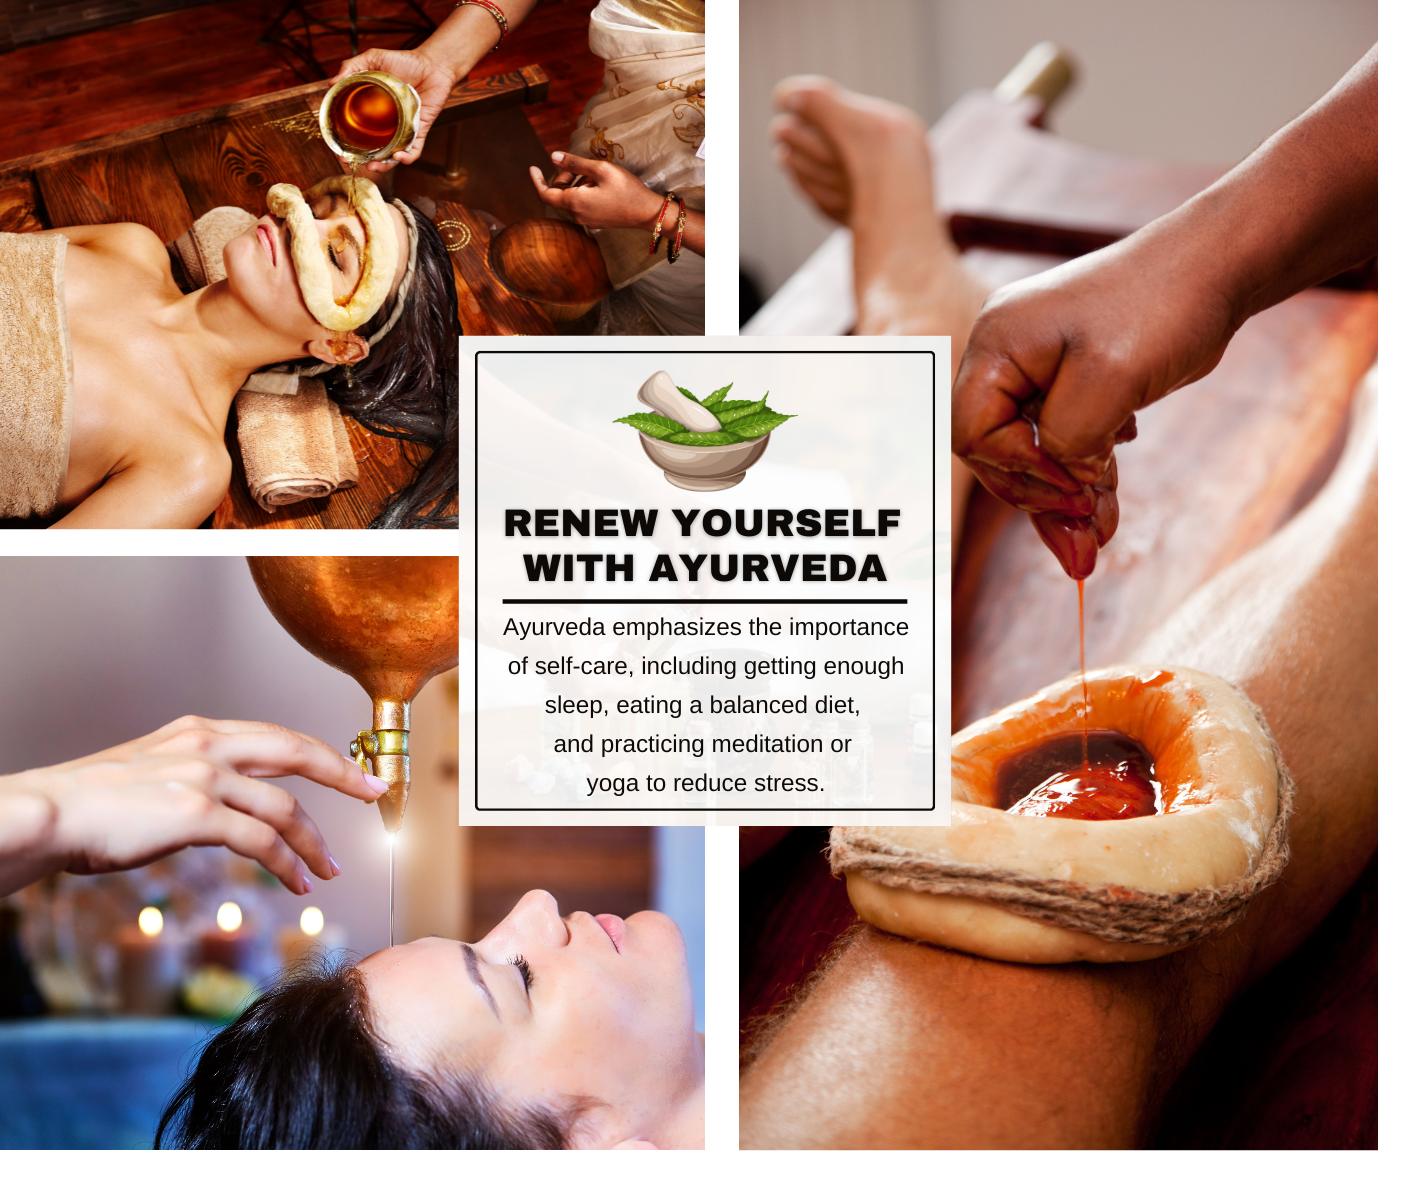 Ayurveda emphasizes the importance of self-care, including getting enough sleep, eating a balanced diet, and practicing meditation or yoga to reduce stress.